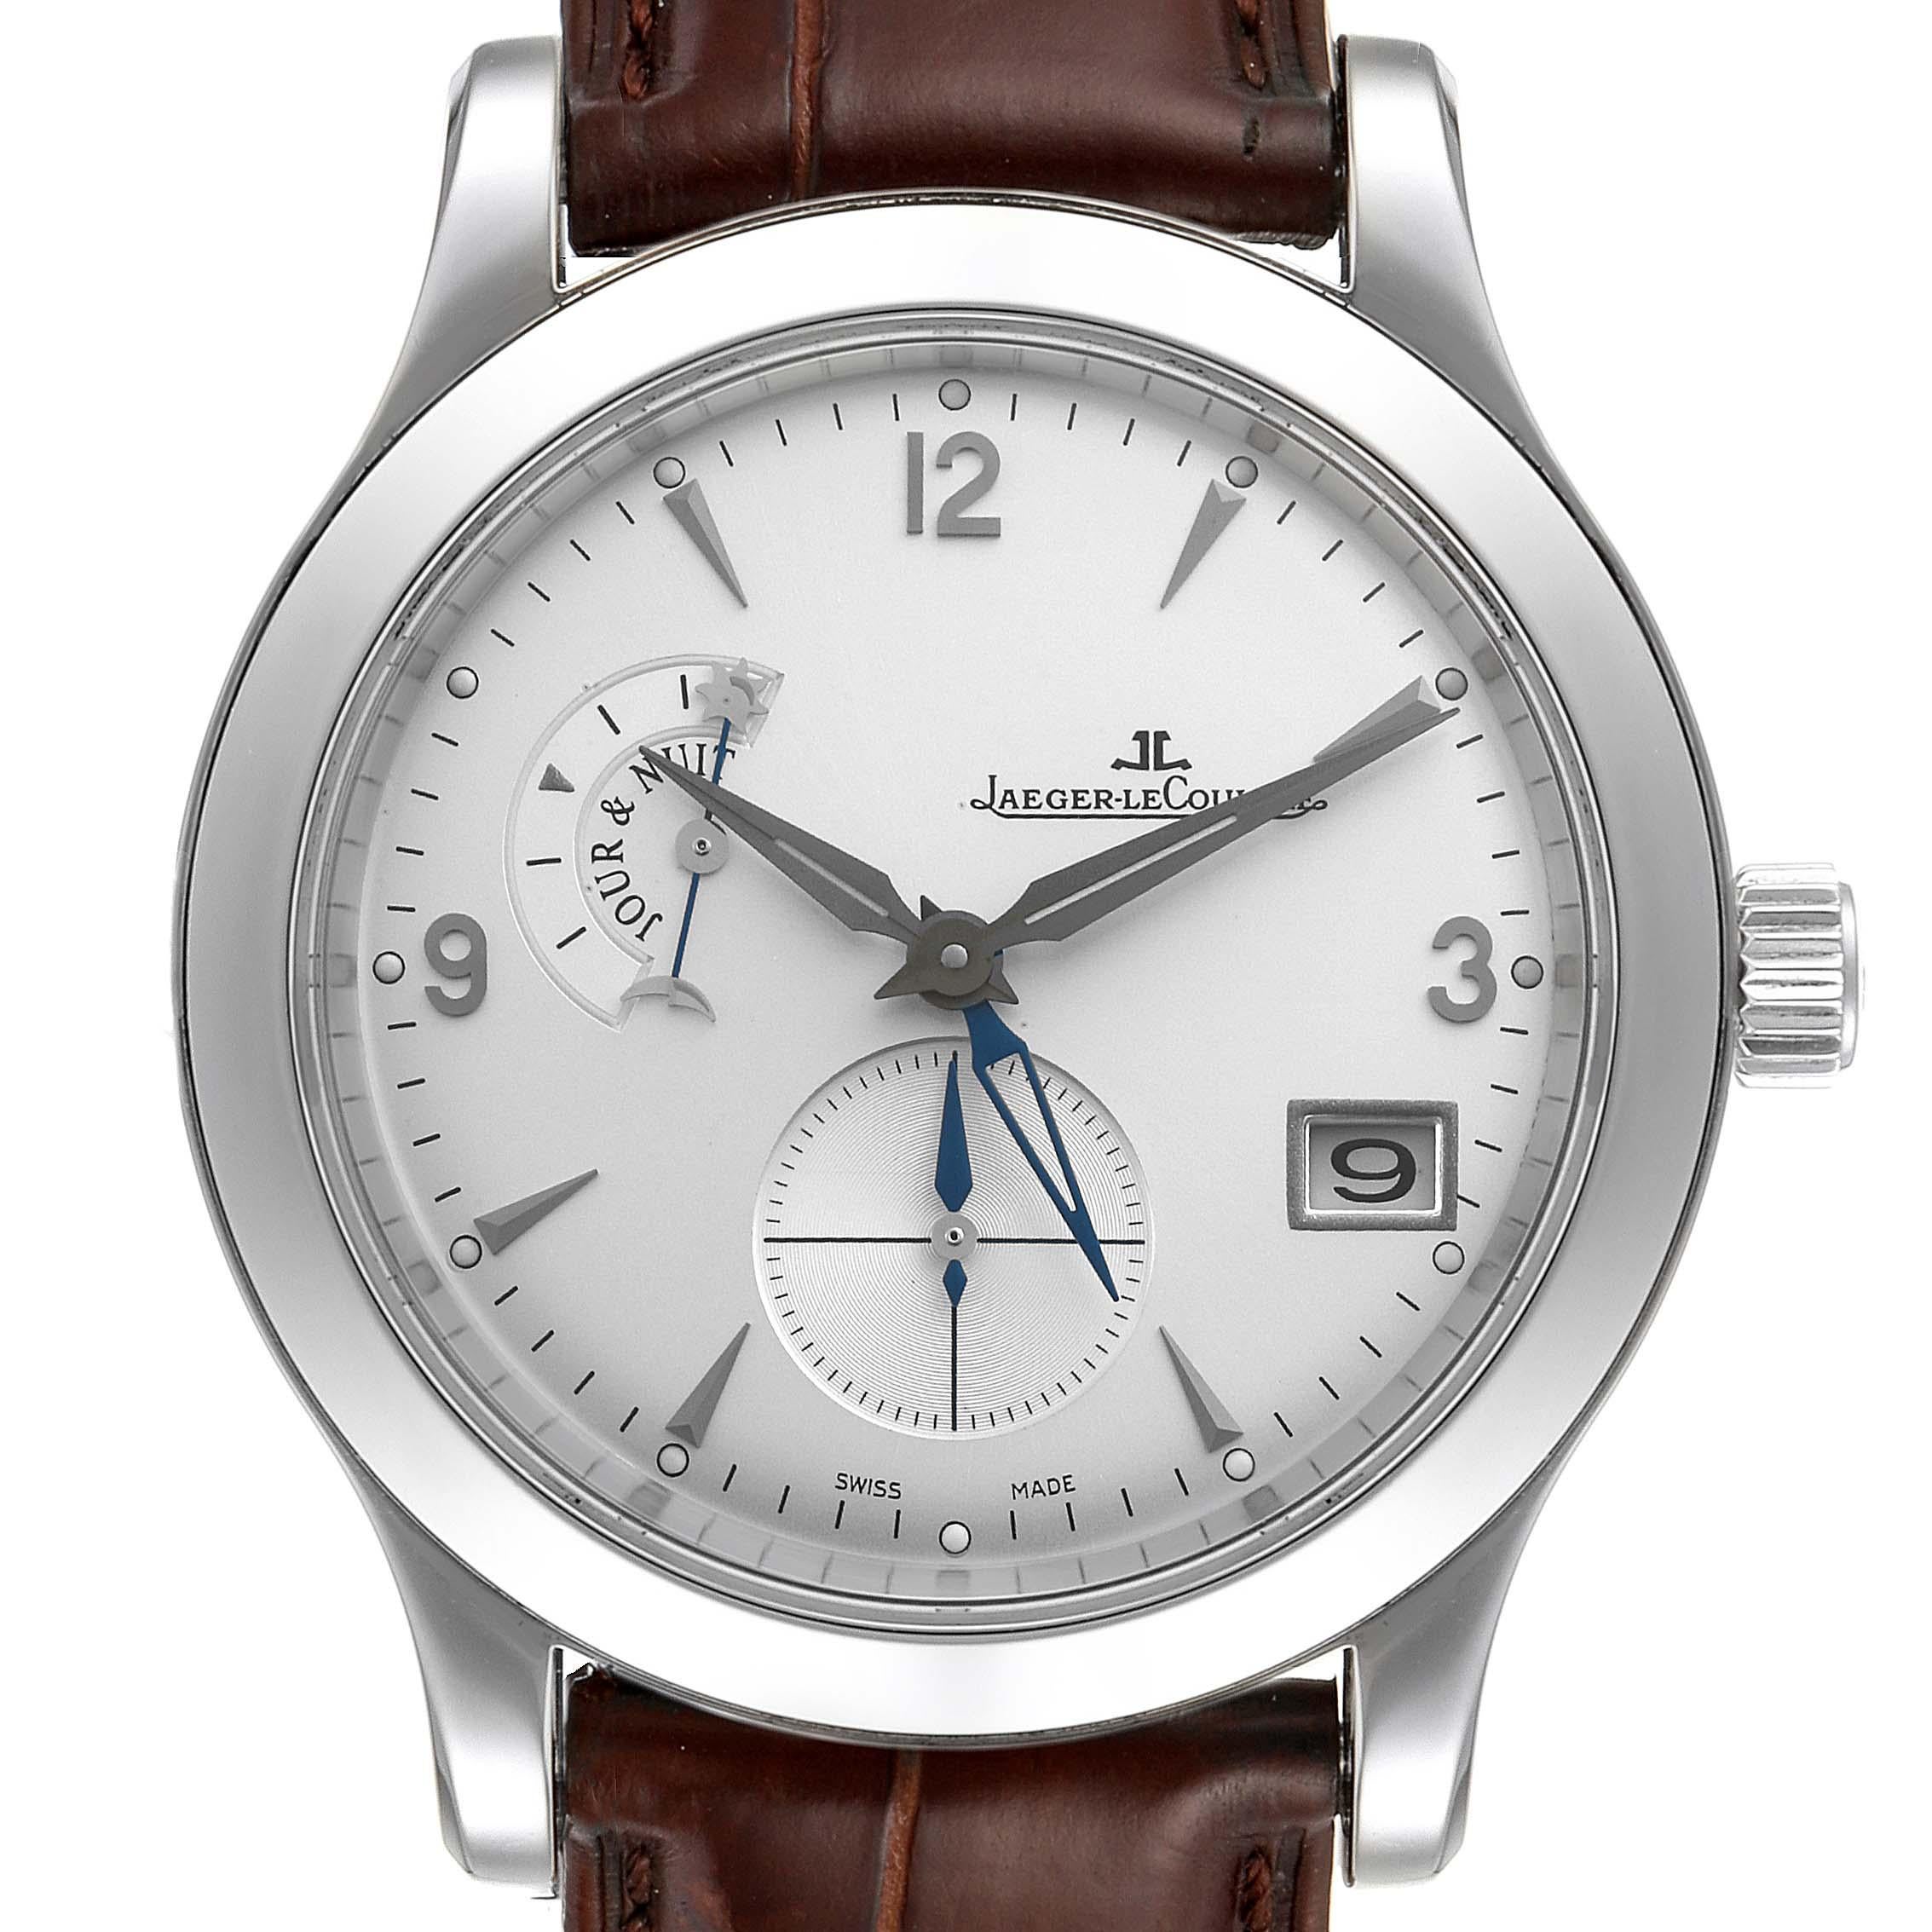 Jaeger Lecoultre Master Control Hometime Mens Watch 147.8.05.S Q1628420. Self-winding automatic movement. Stainless steel case 40.0 mm in diameter. Exhibition case back. Concave lugs. Stainless steel smooth bezel. Scratch resistant sapphire crystal.